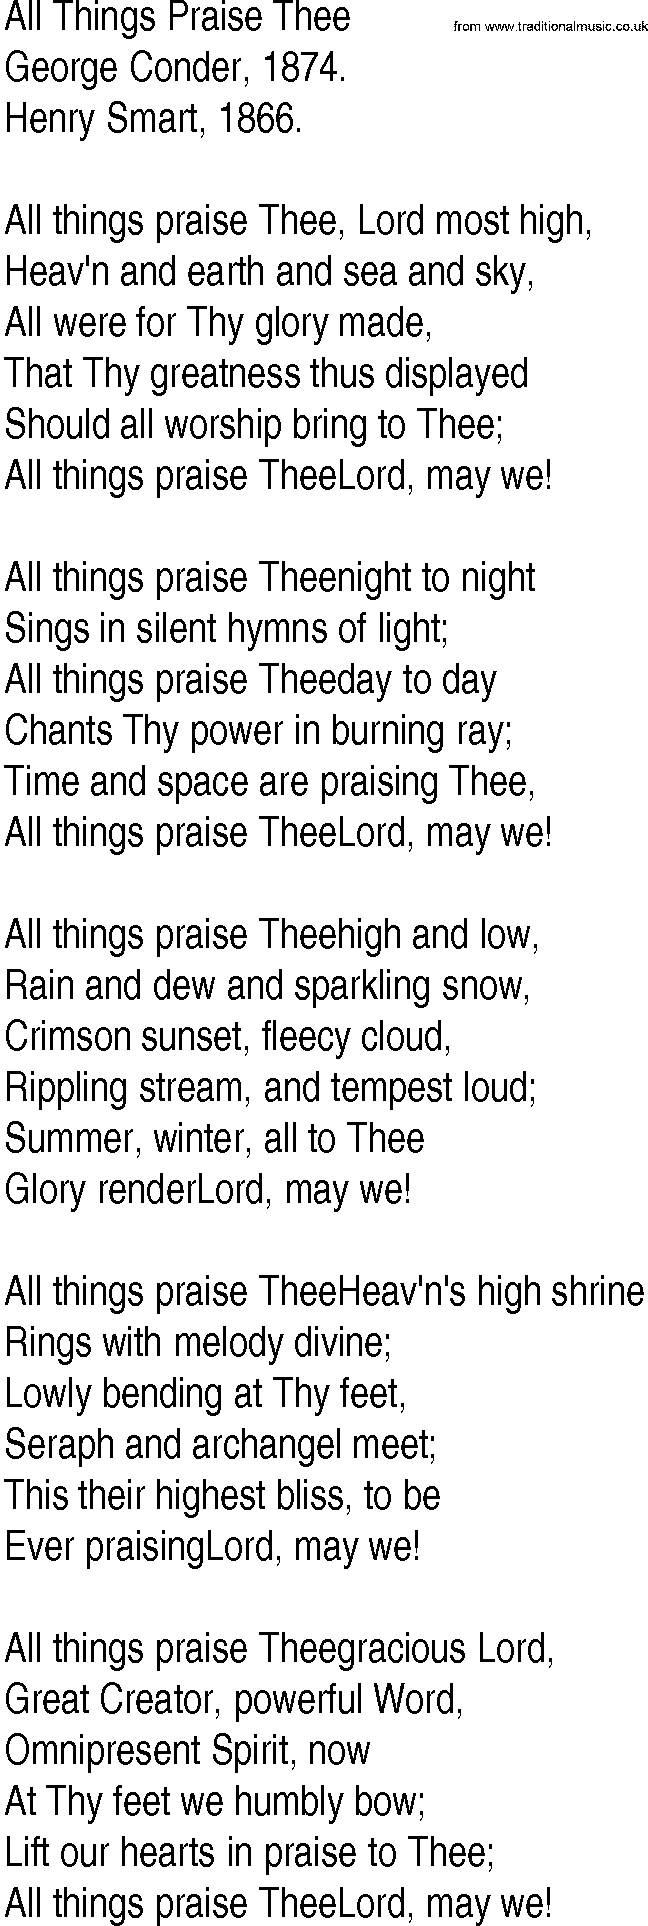 Hymn and Gospel Song: All Things Praise Thee by George Conder lyrics